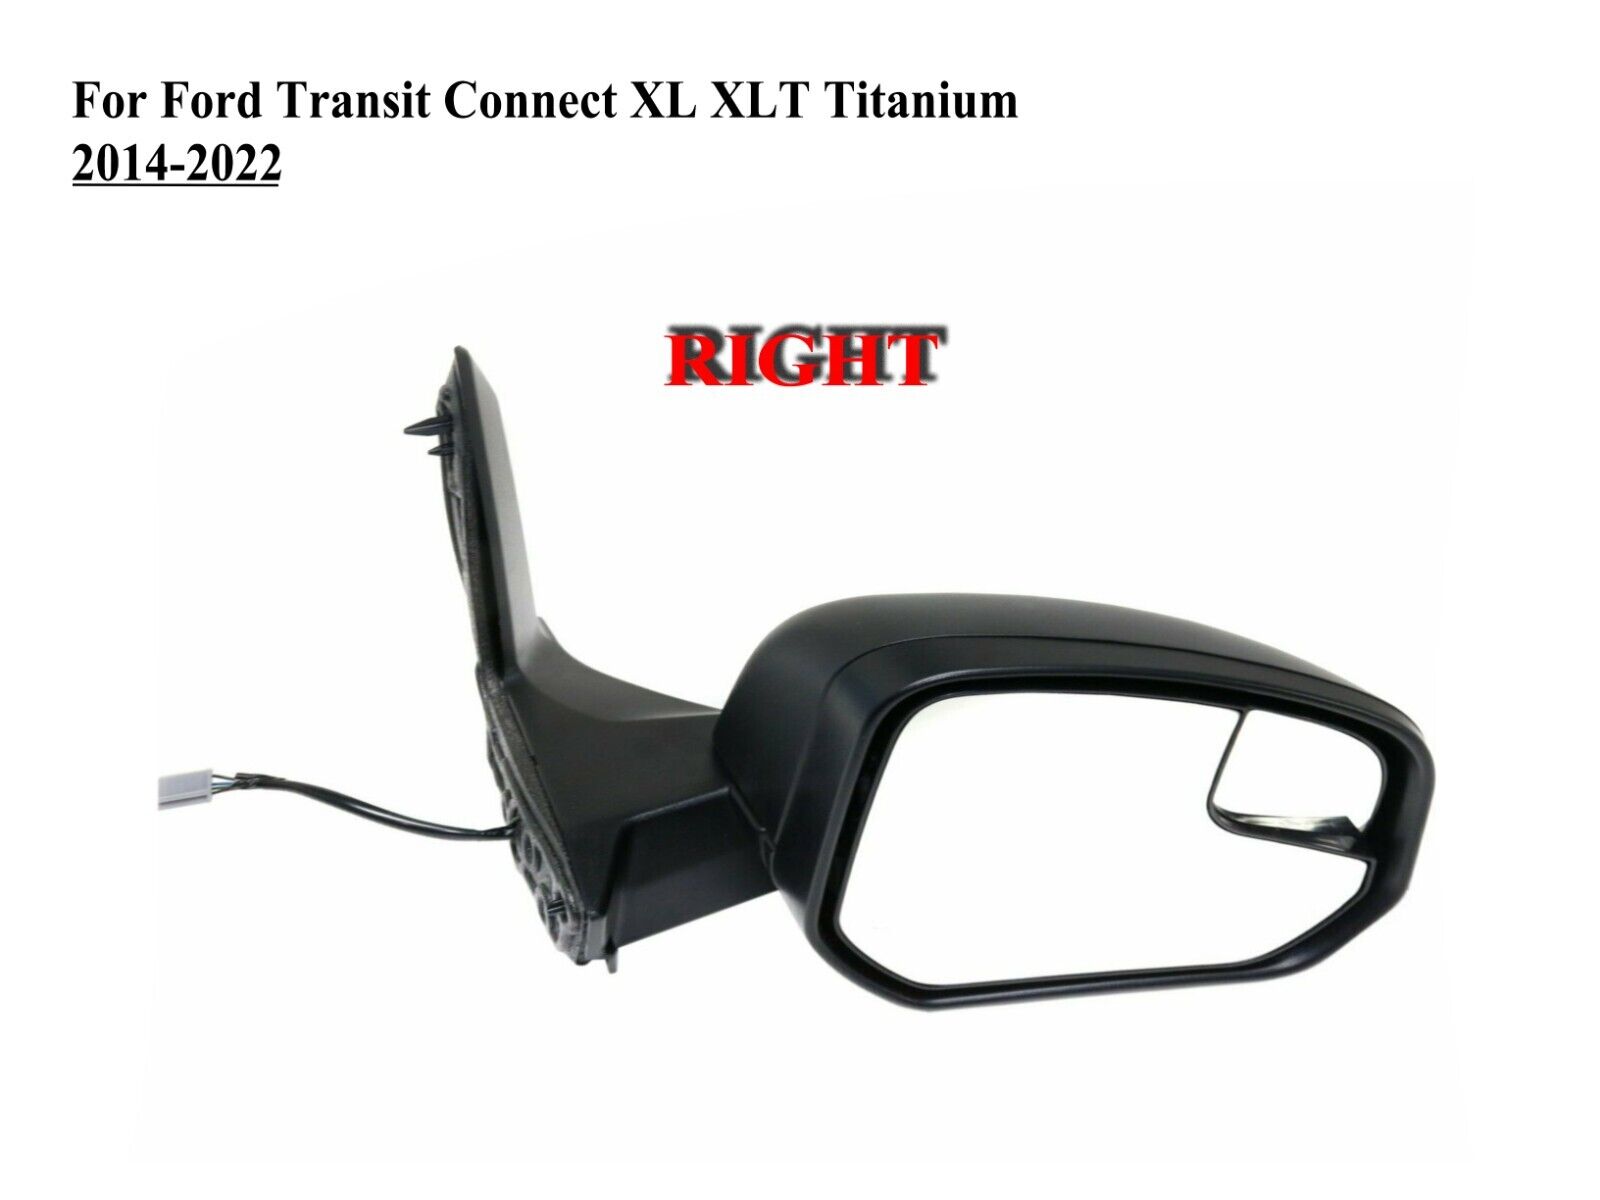 Passenger Right Side Door Mirror for 2014-2022 Ford Transit Connect XL XLT TITAN